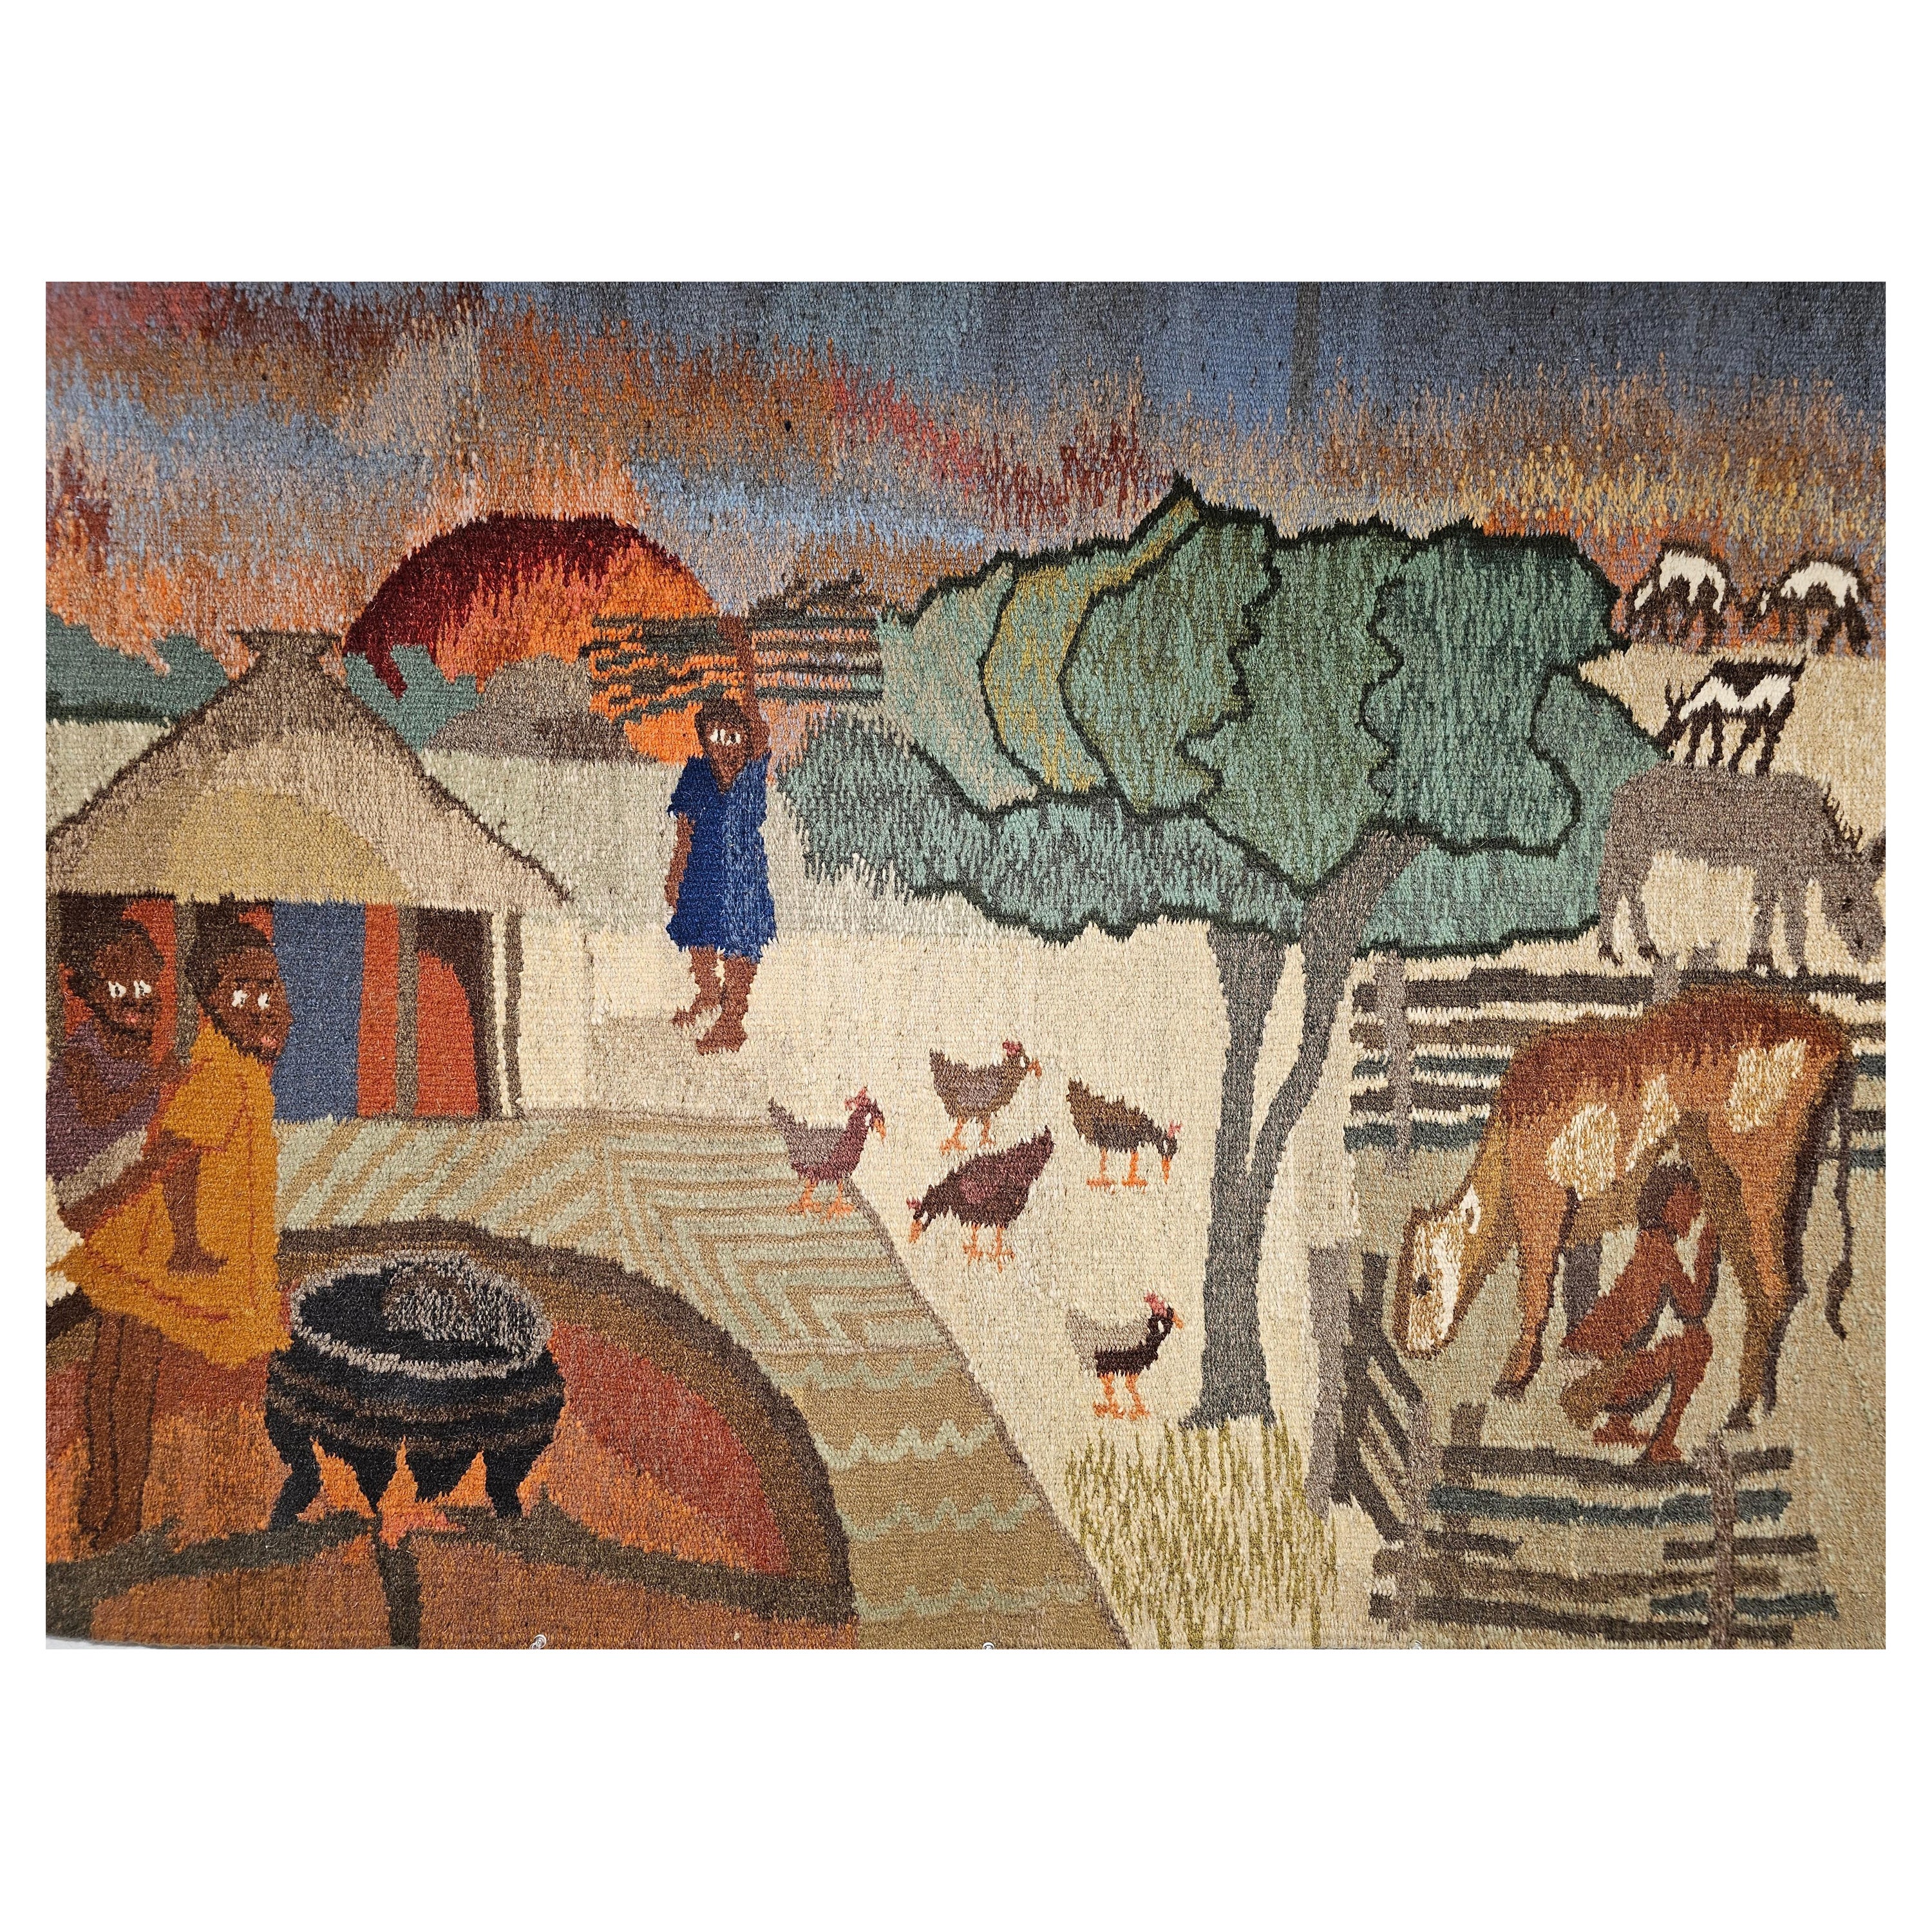 Vintage Hand Woven African Tapestry Depicting Life Scenes Around a Village For Sale